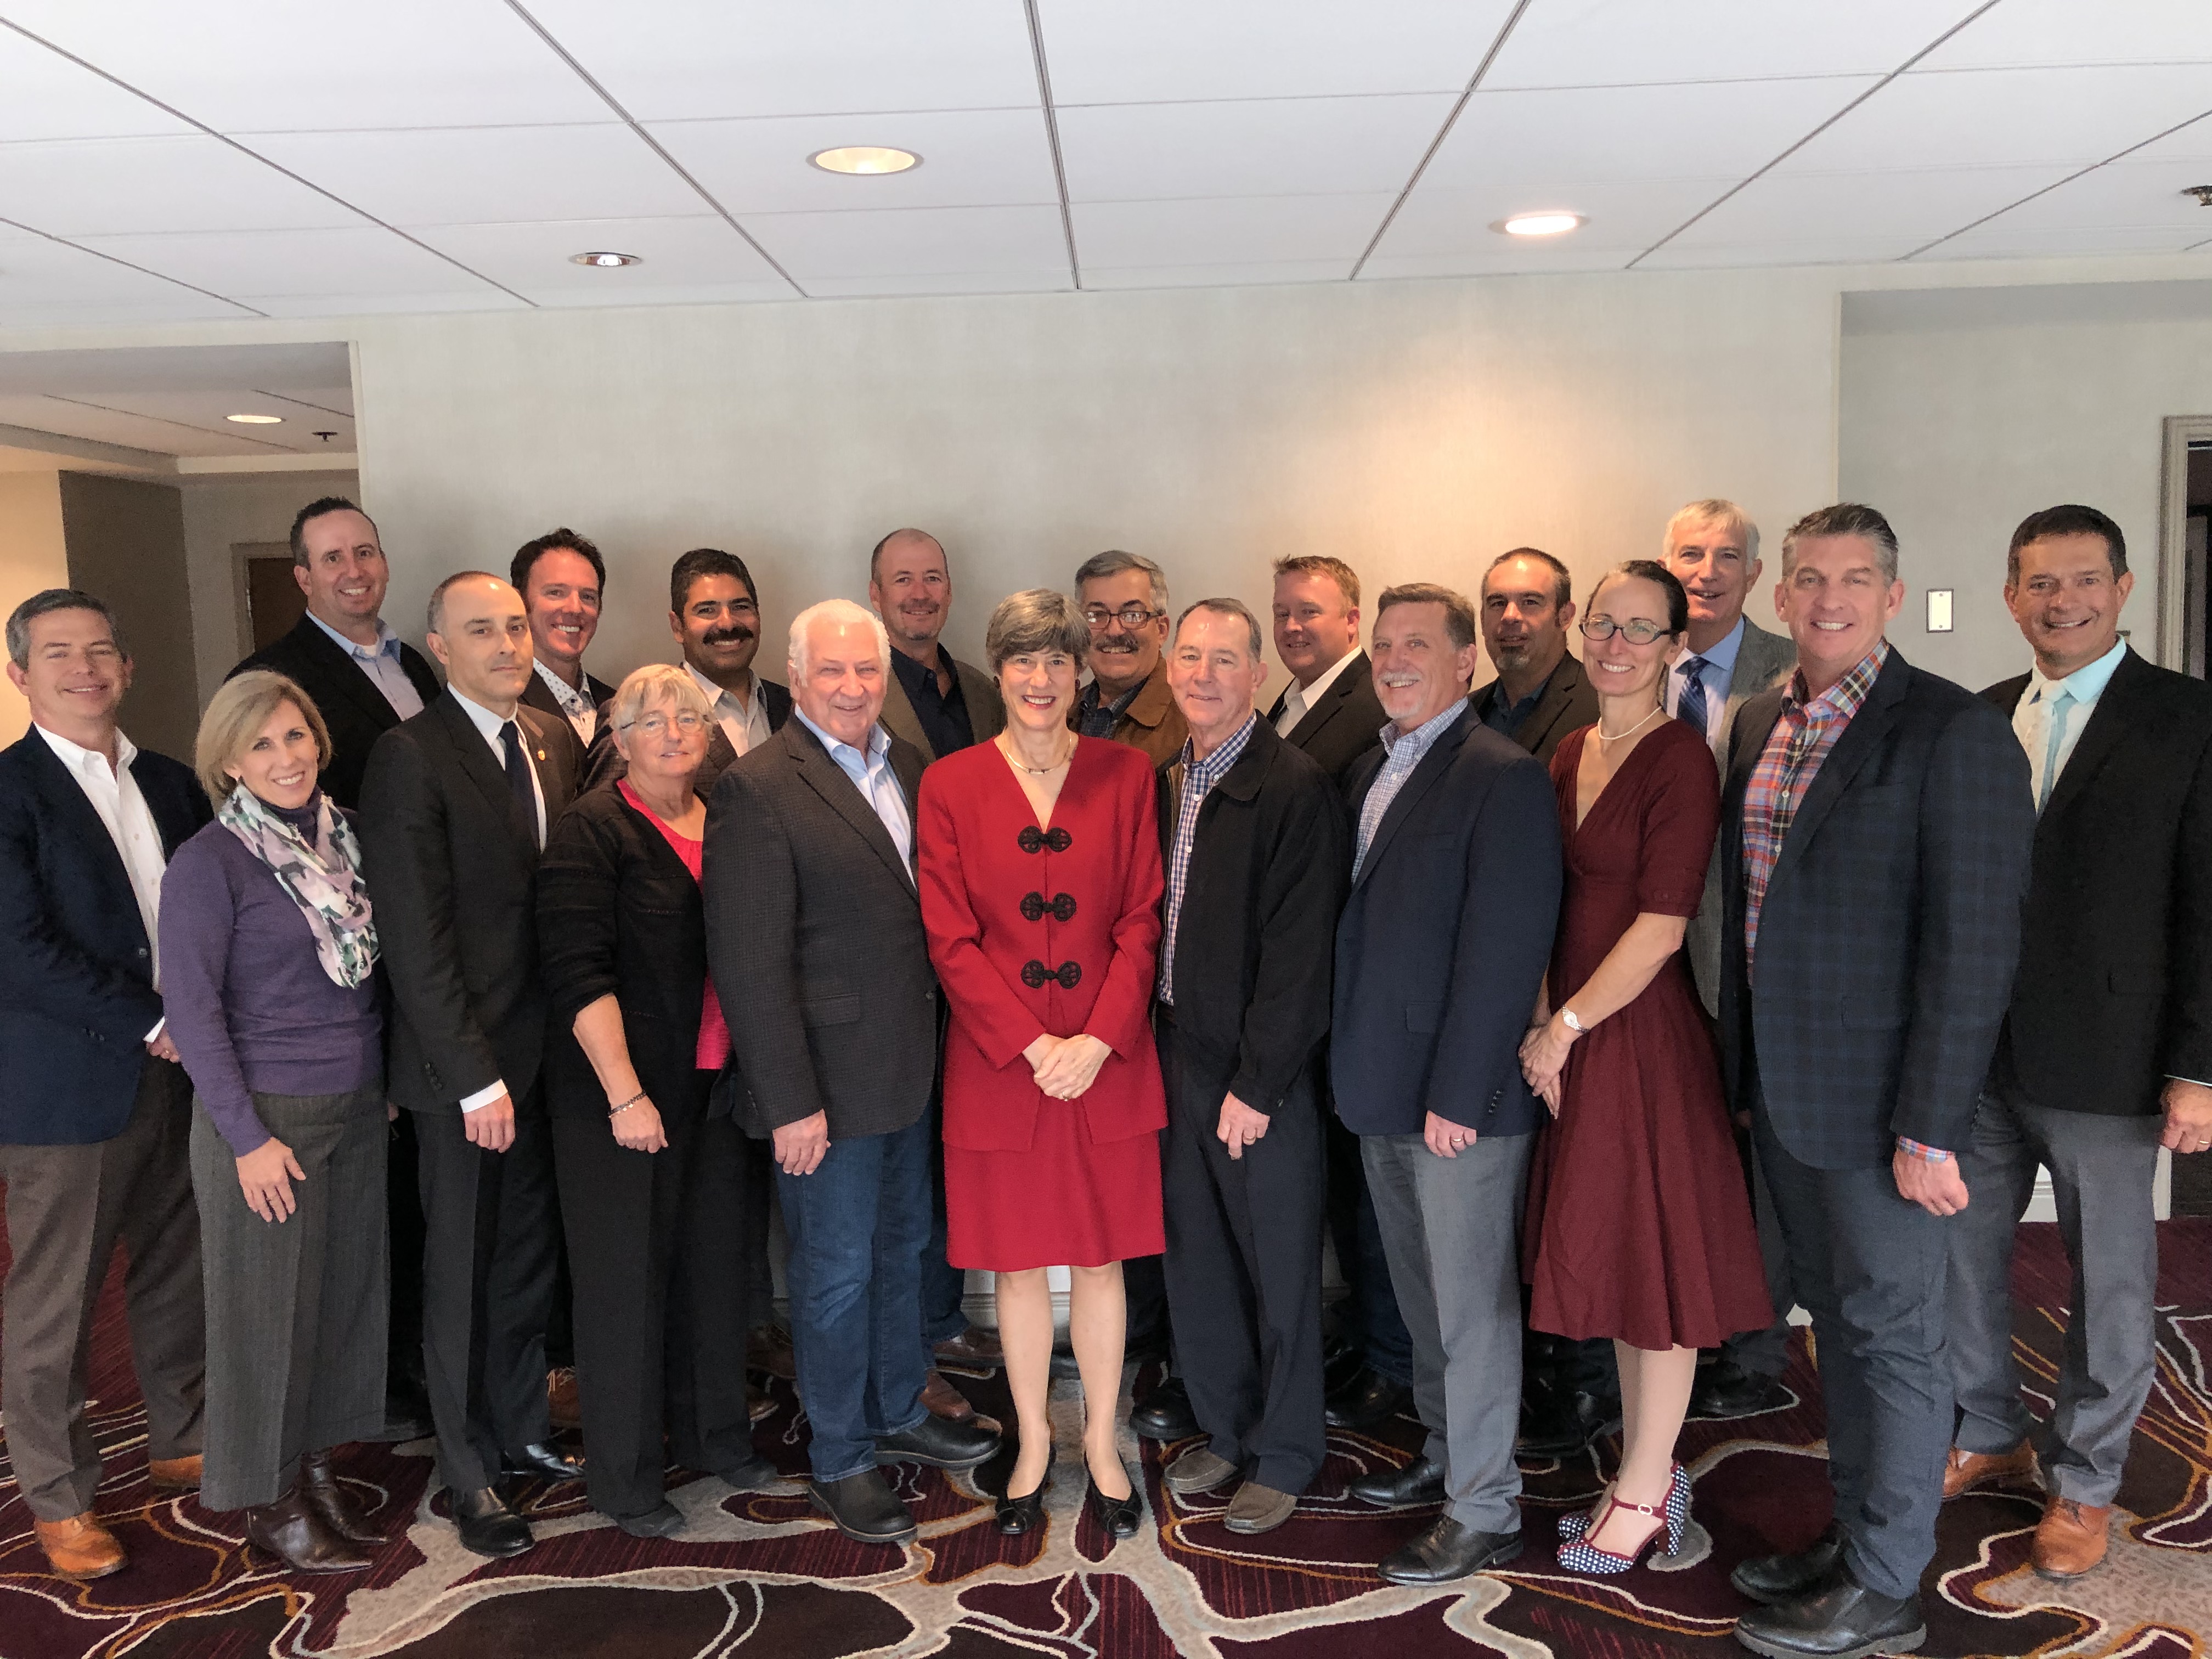 2019-2020 Board of Directors missing Dave Phippen